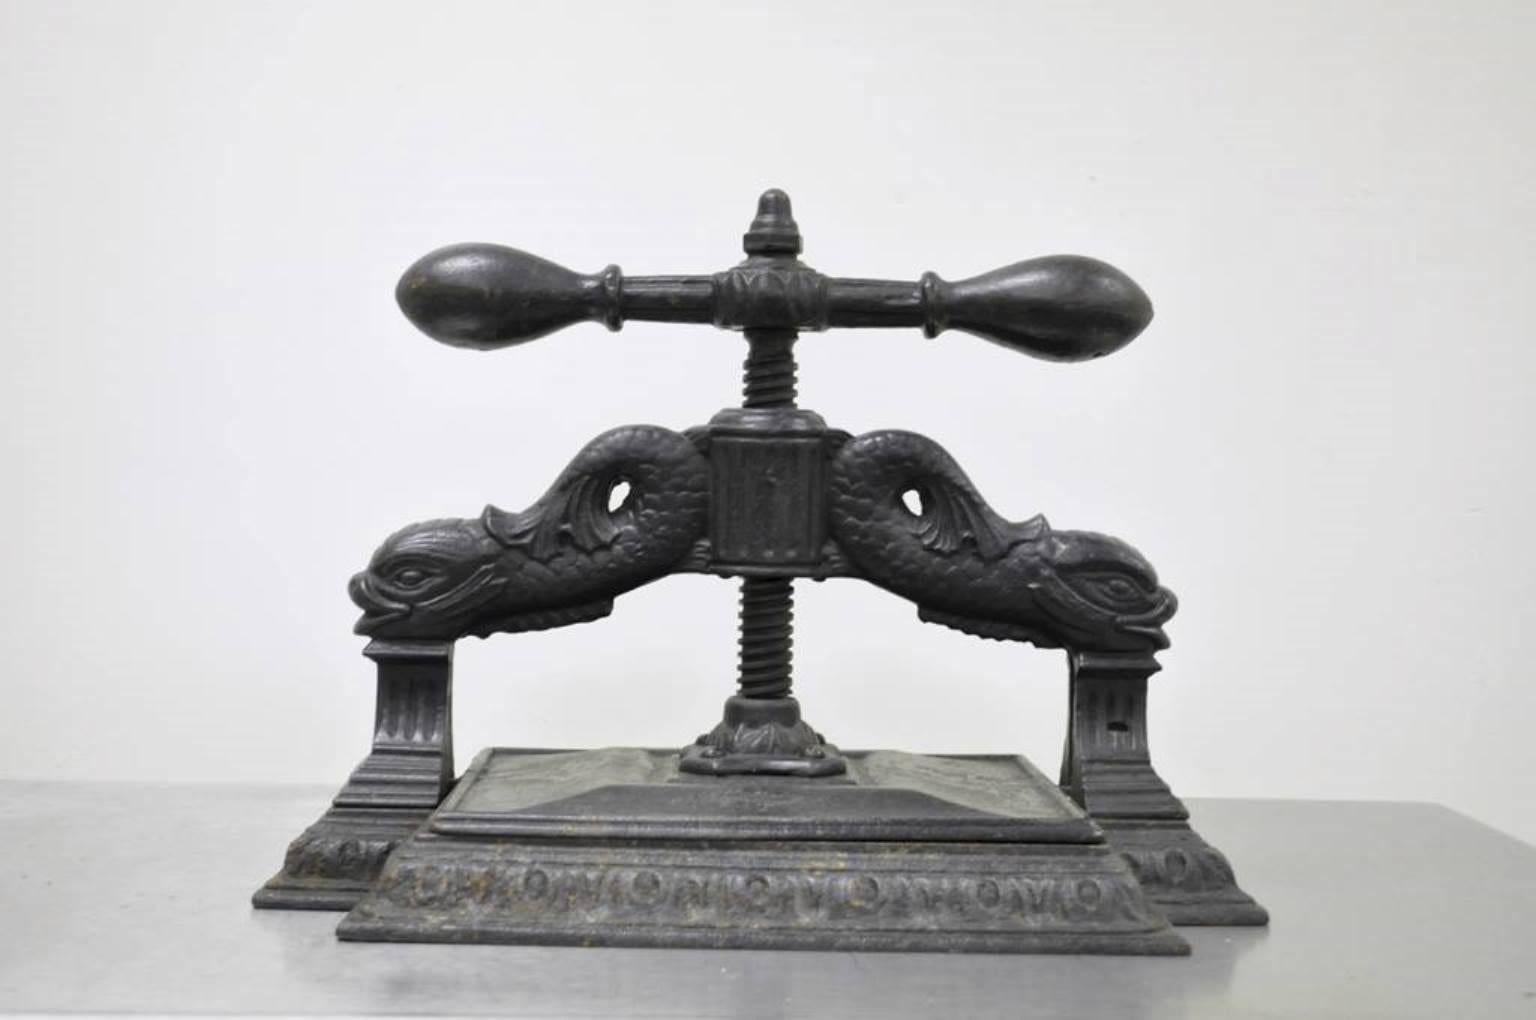 Very unique and historically important antique cast iron dolphin book/copy press. The piece features intricate supports with dolphins and fluted columns, and acanthus accented base. The press is very substantial and heavy, and though it does not